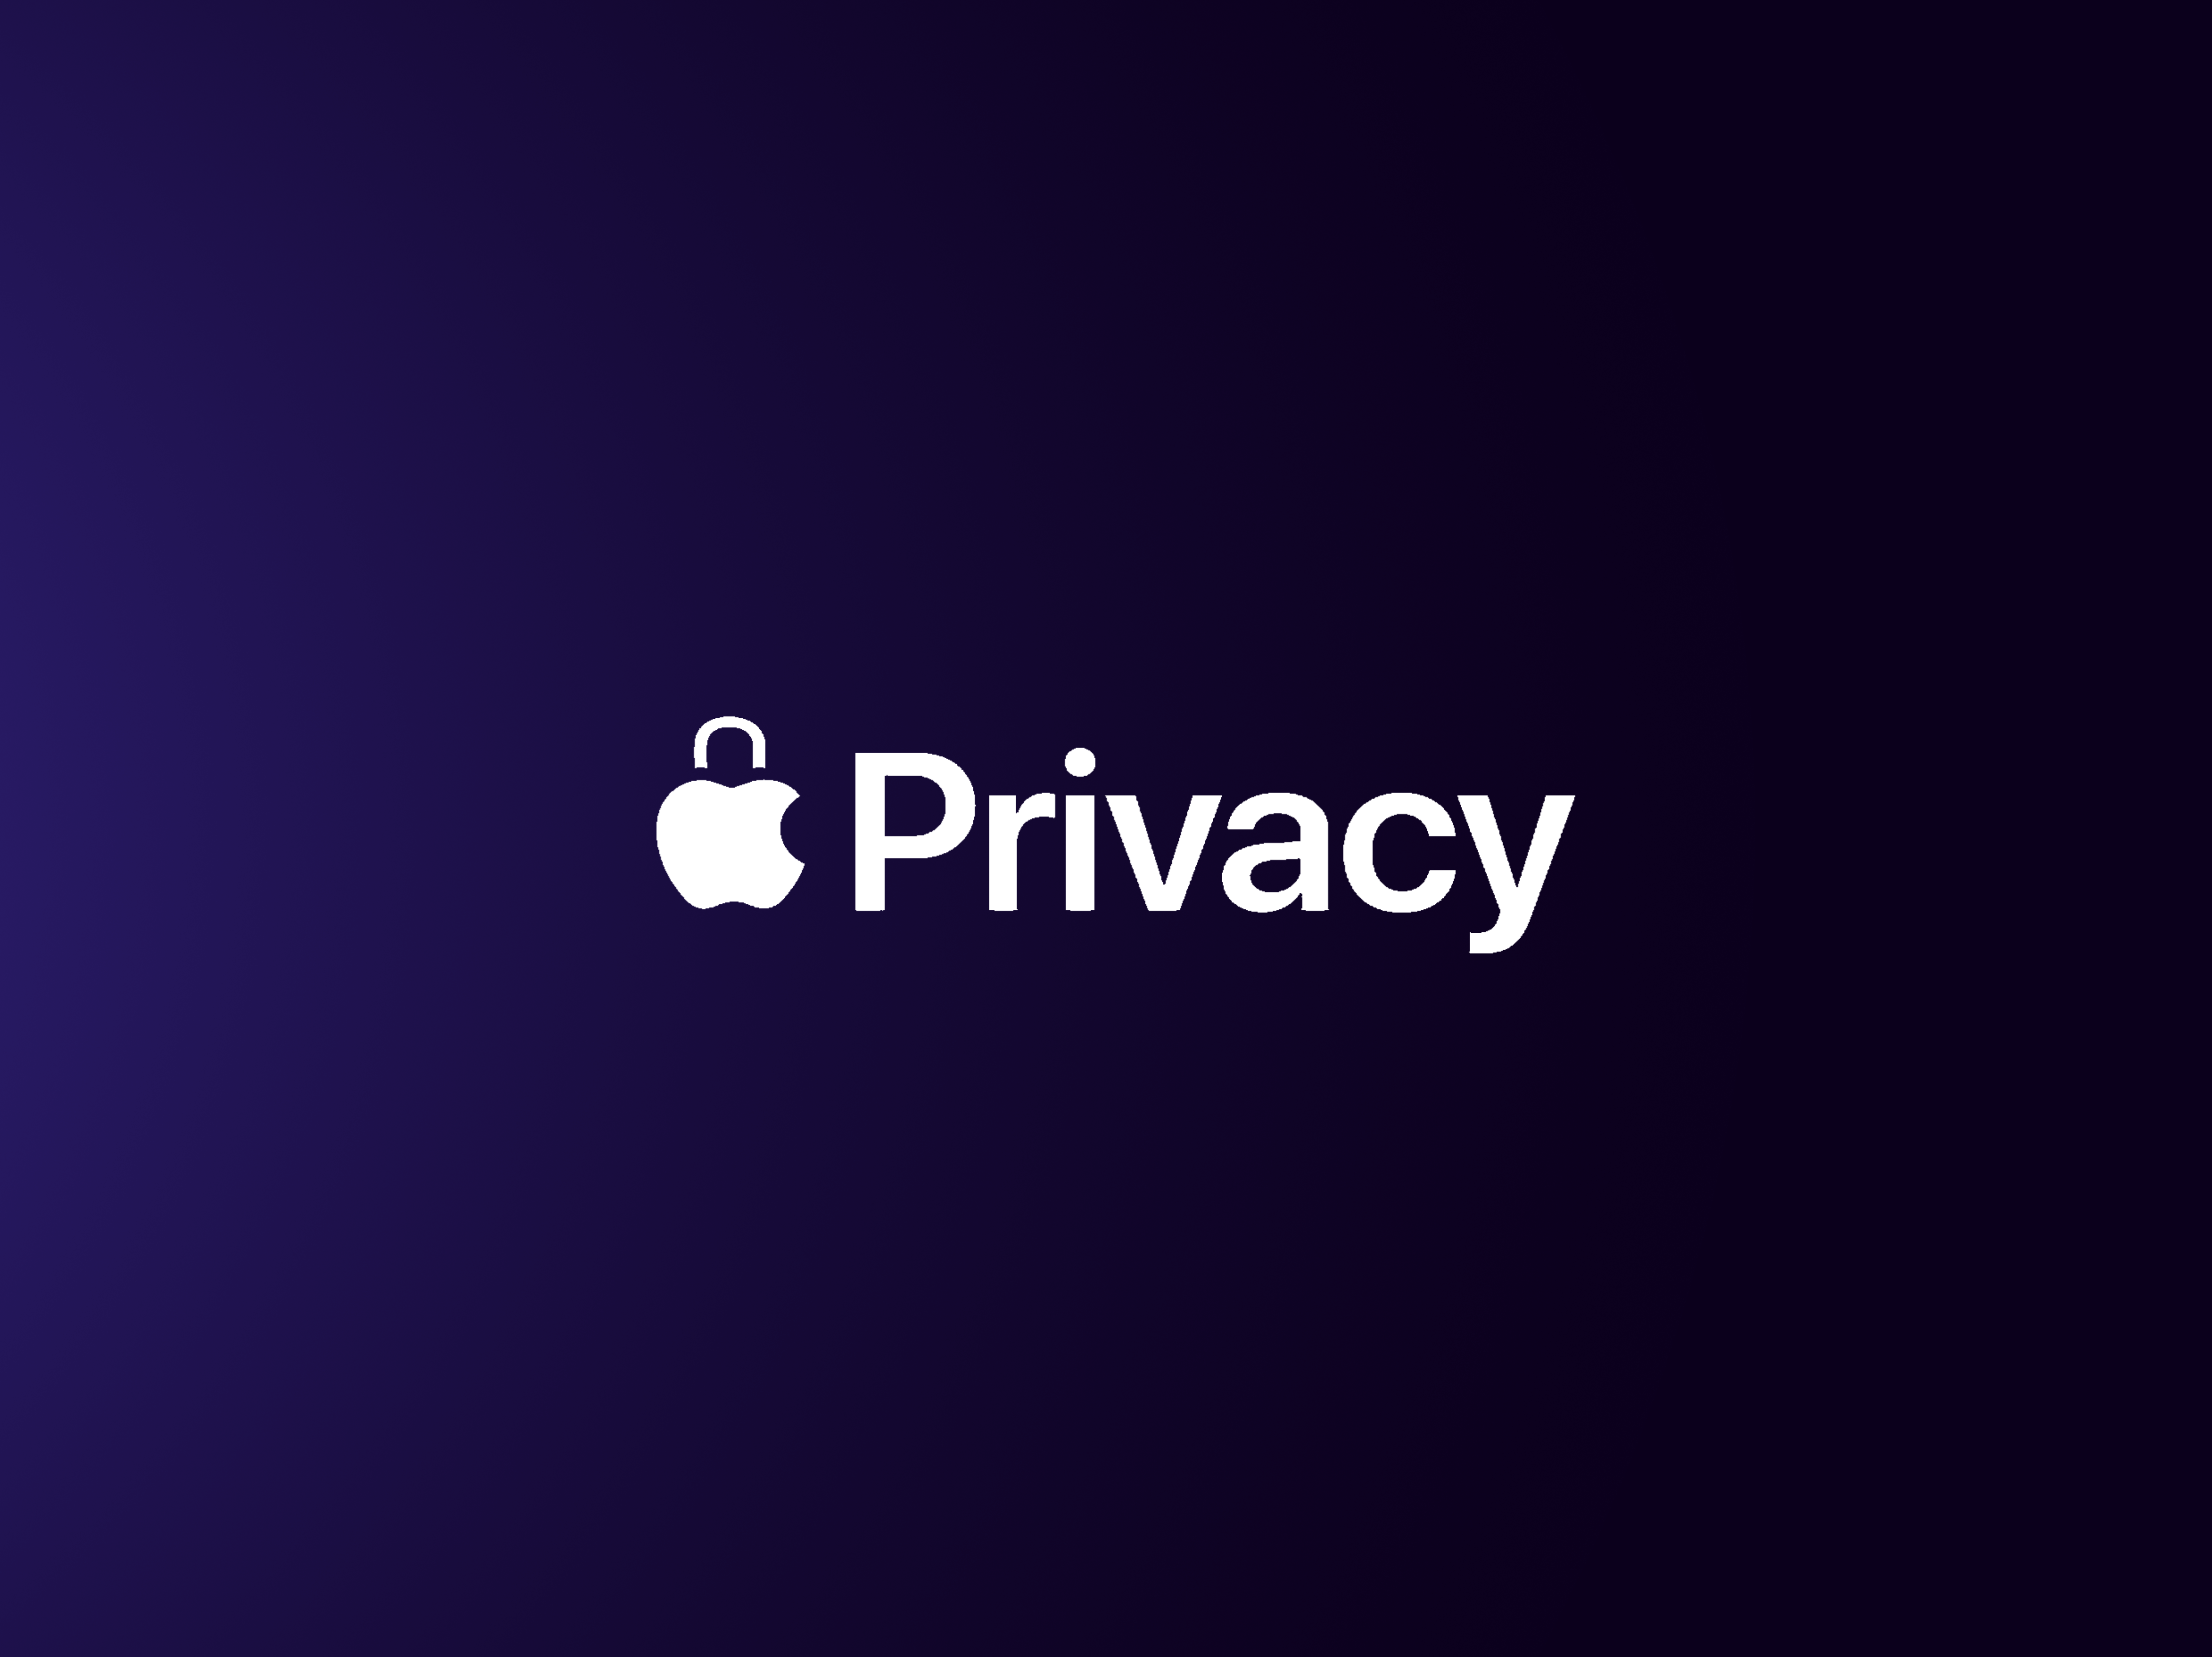 Apple’s WWDC21 | iCloud+ and Apple’s privacy focused announcements